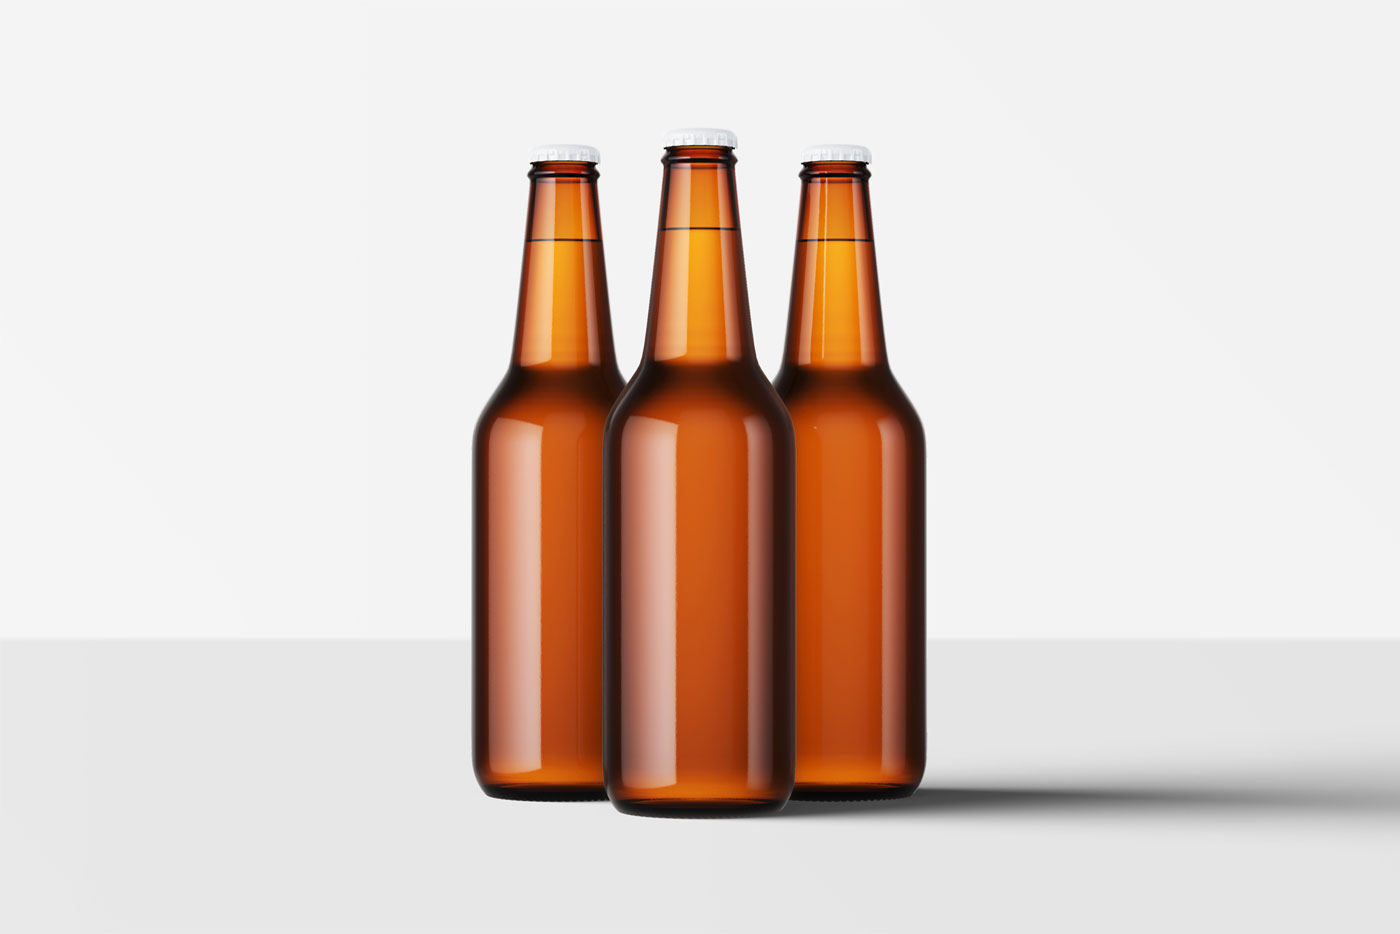 Mockup Featuring Three Beer Bottles FREE PSD